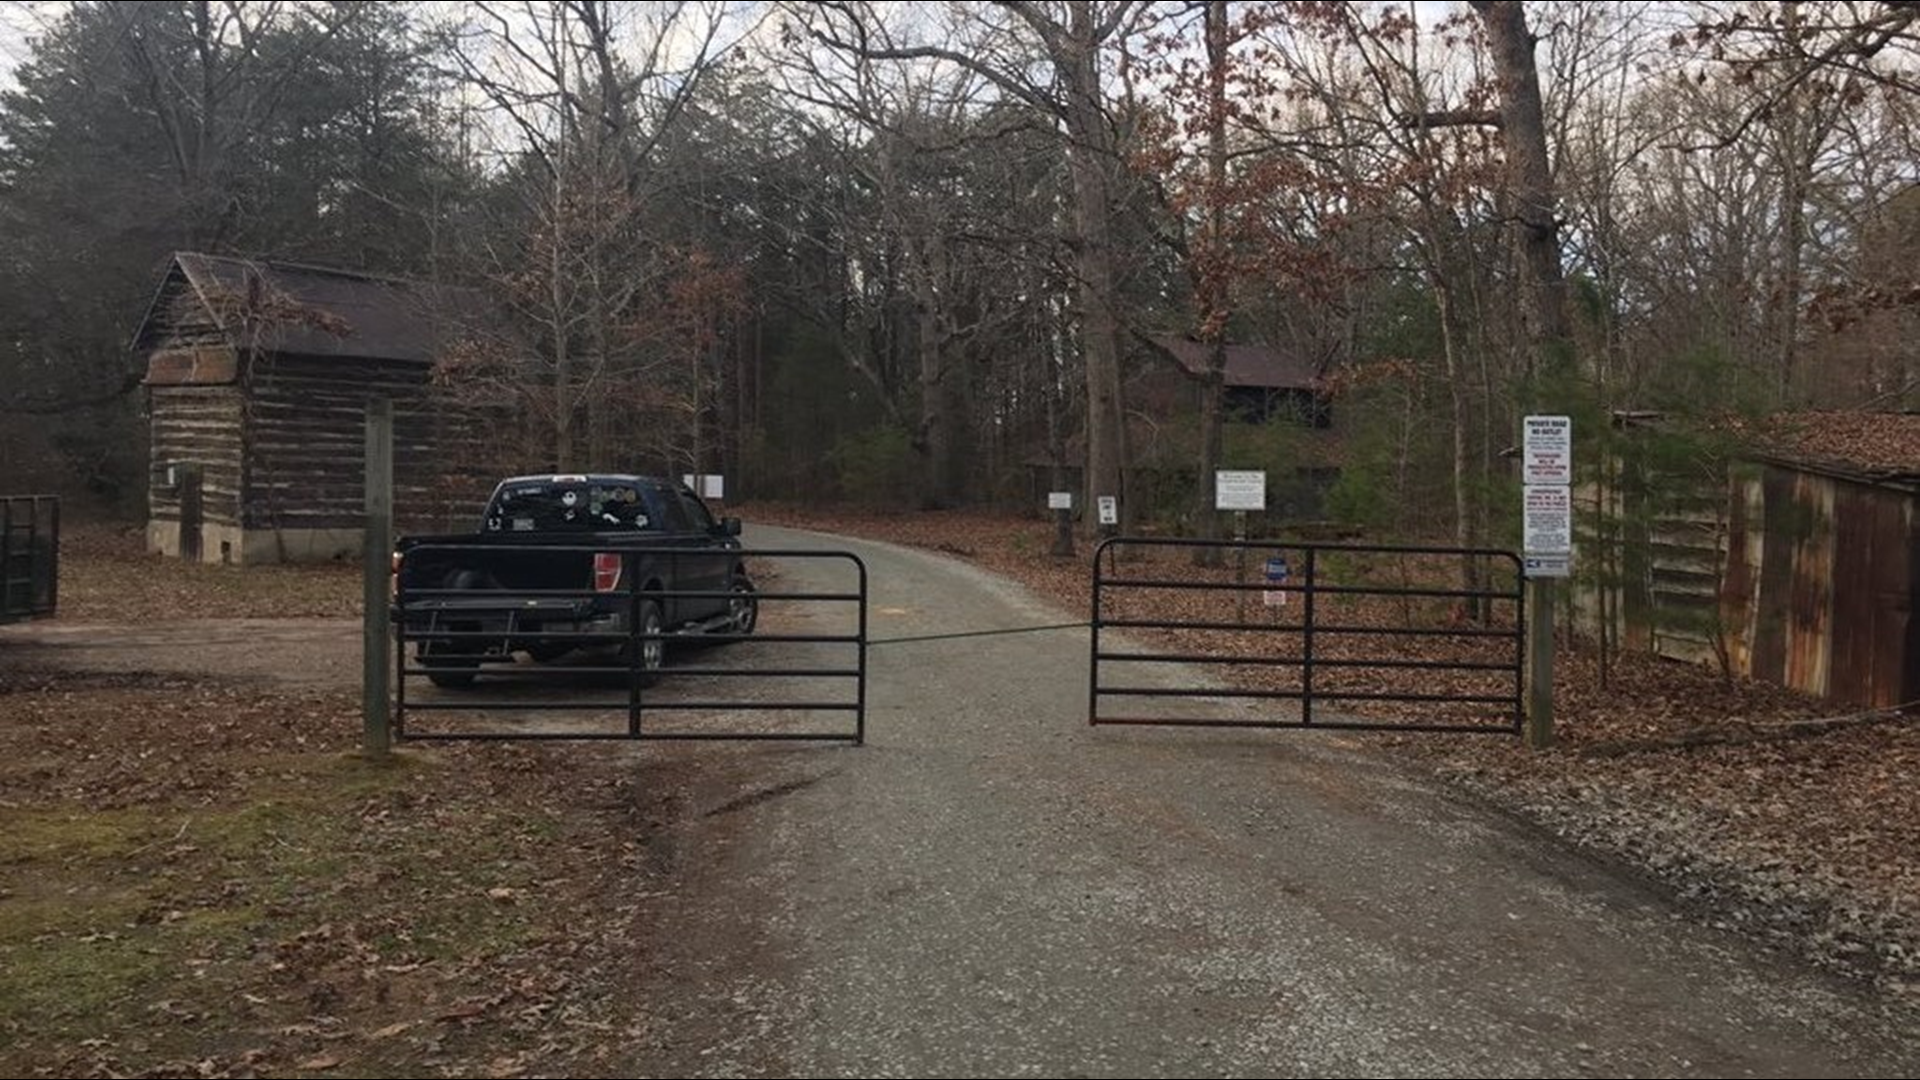 A day after a lion attacked and killed a 22-year-old at the Conservators Center in Caswell Co., people who live around the center say they still feel safe.